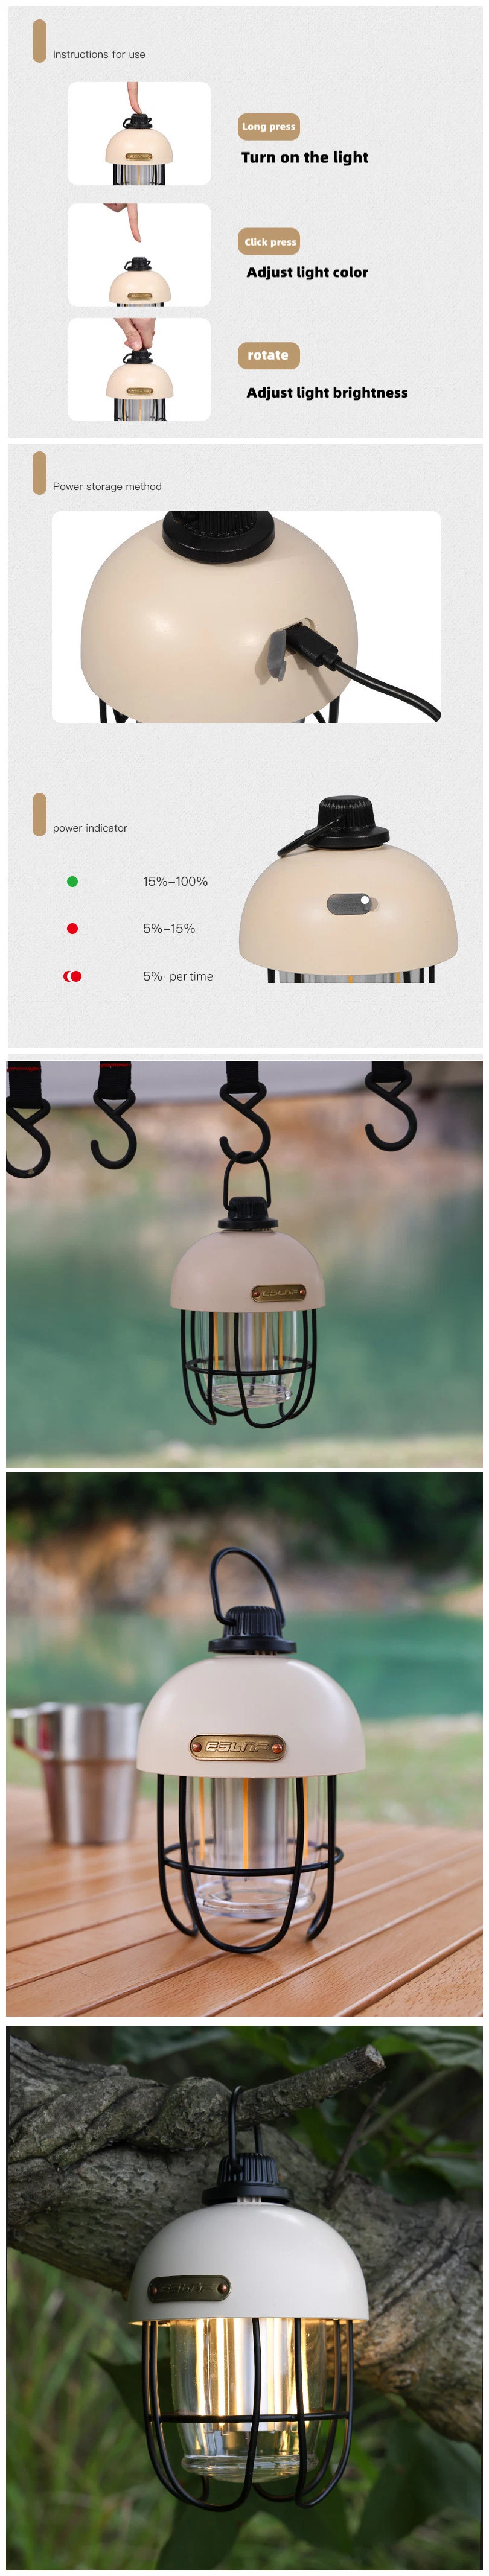 Outdoor Camping Garden Retro Style LED Atmosphere Camping Light